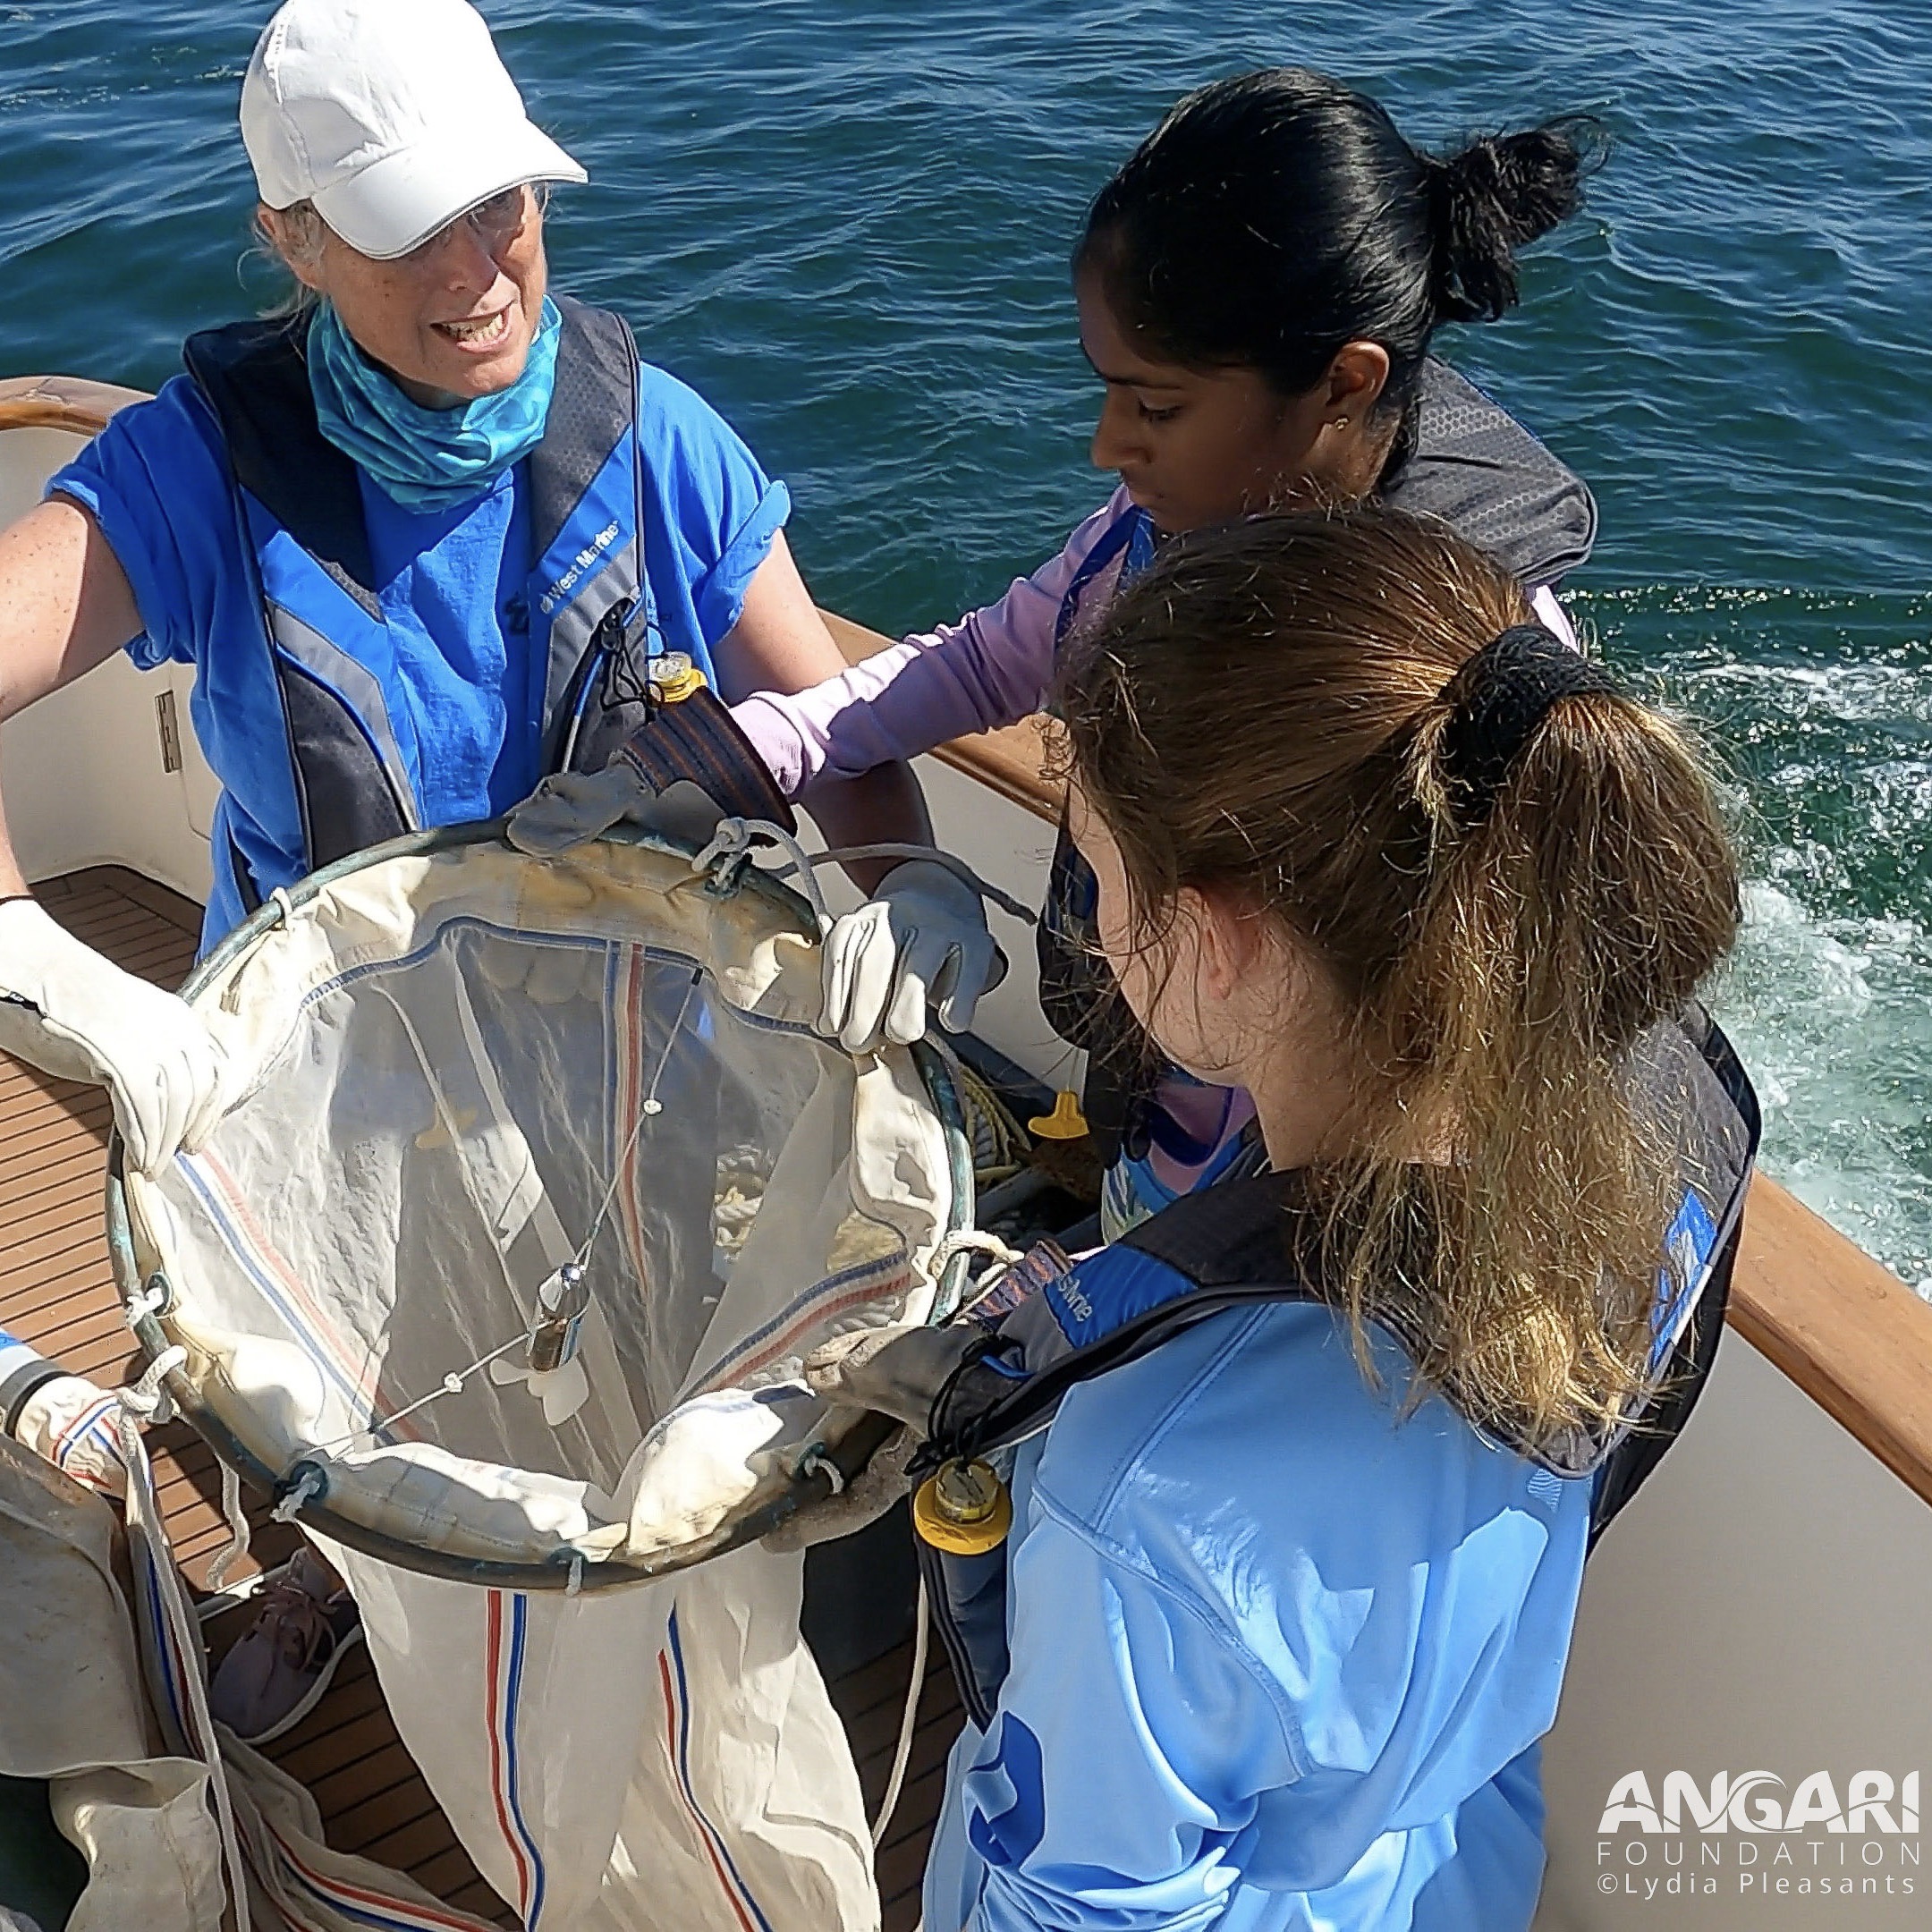 On R/V ANGARI with the Oceanography Camp for Girls preparing to deploy a plankton net to help understand marine plankton, the small and mighty of the ocean!